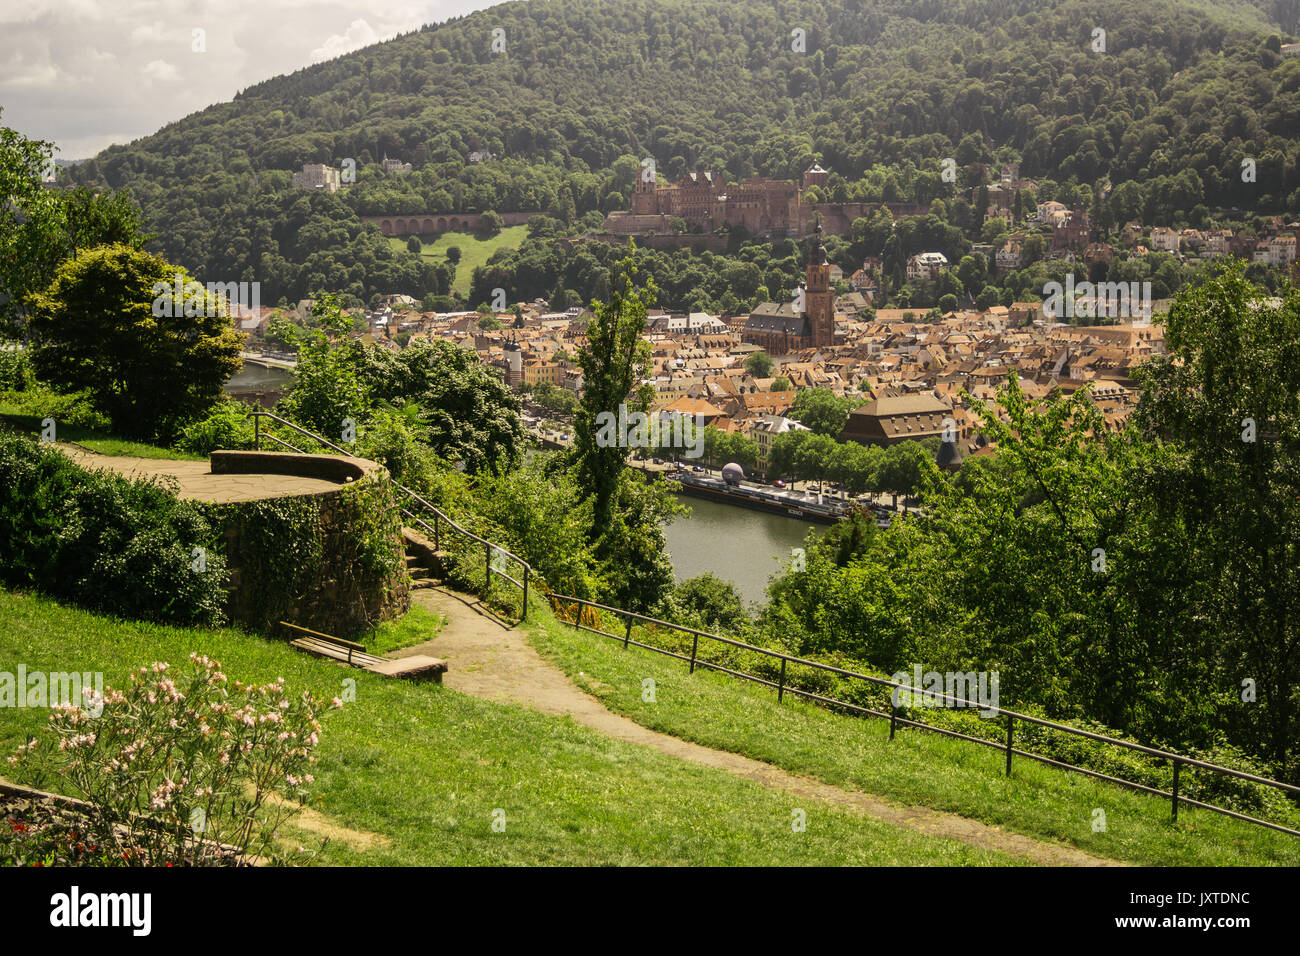 Philosophenweg trail road and gardens in Heidelberg, Germany, during the summer. Stock Photo